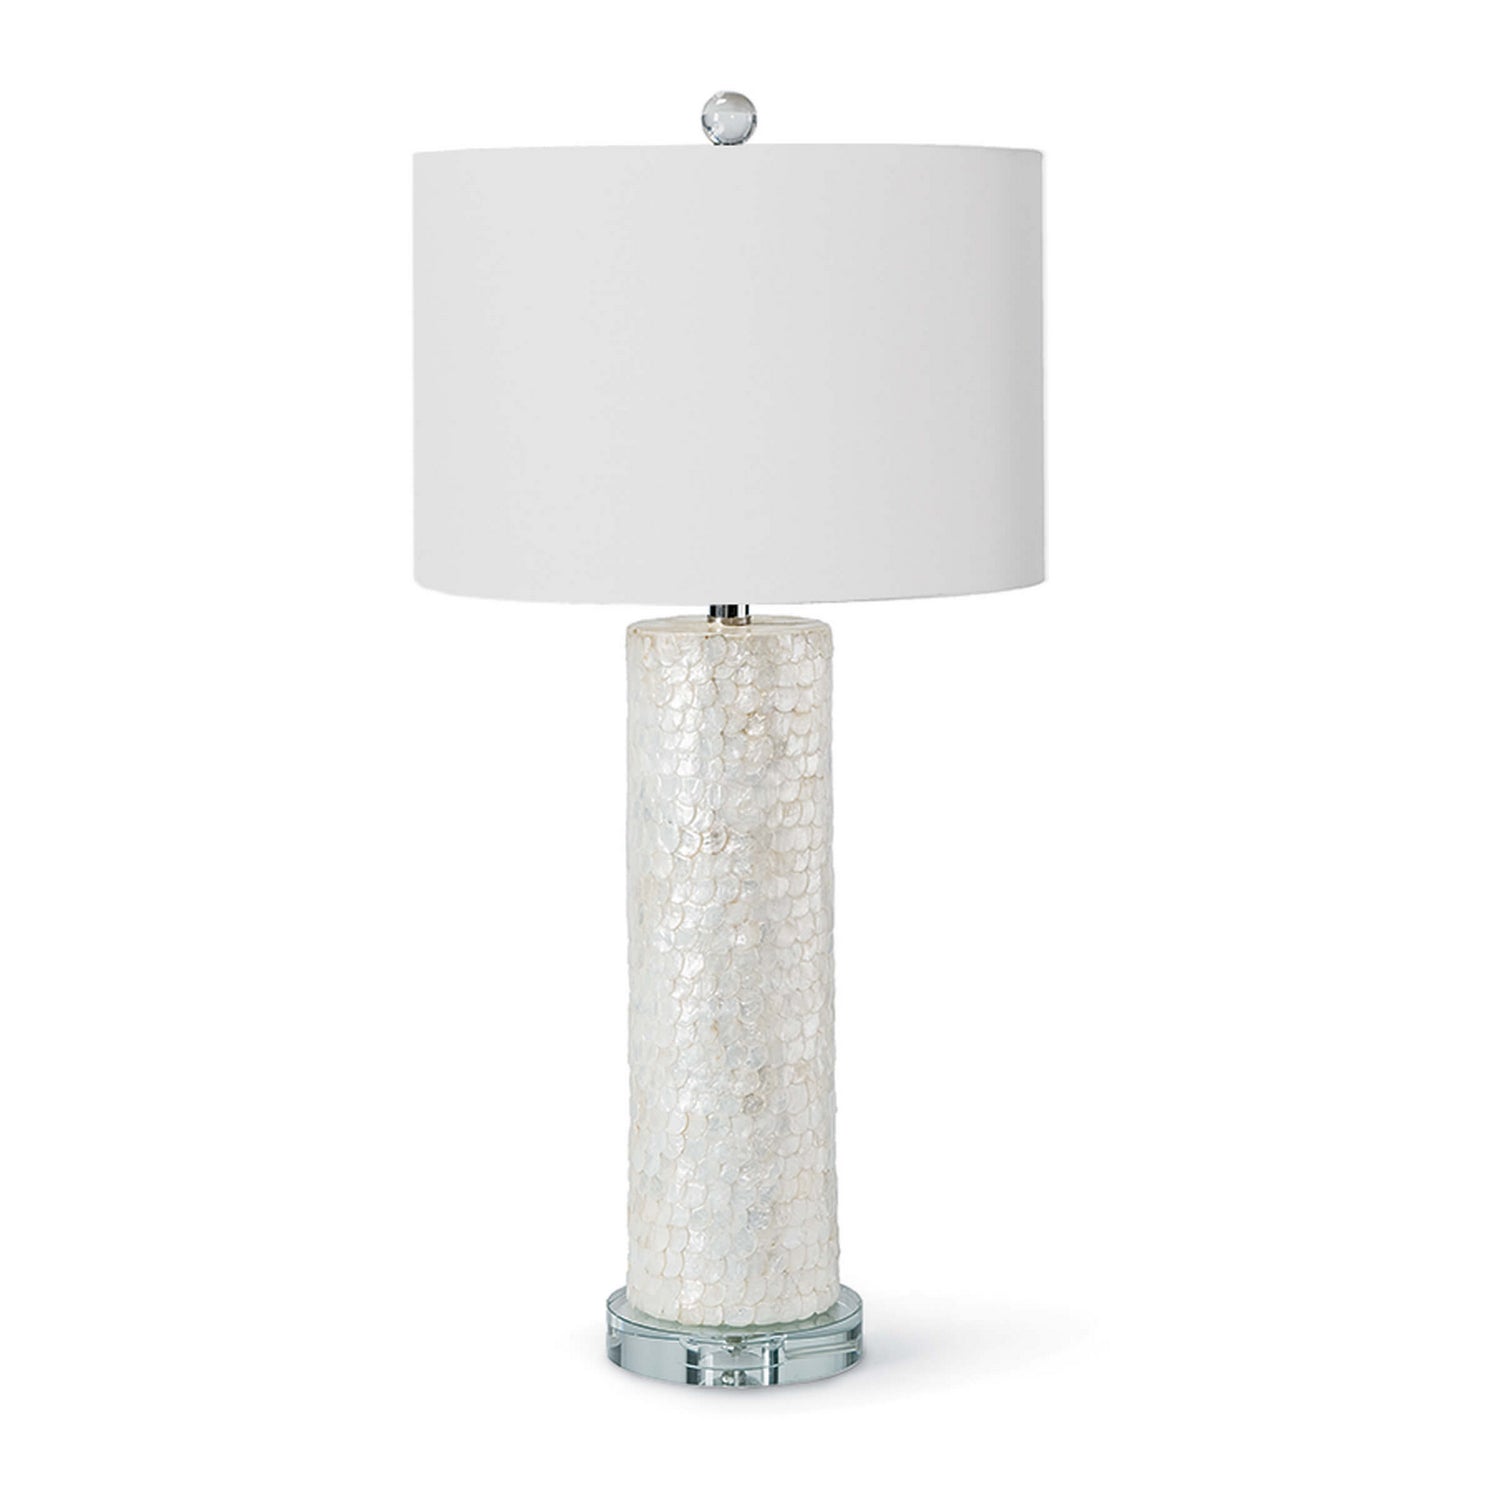 Regina Andrew - 13-1080 - One Light Table Lamp - Scalloped - Natural